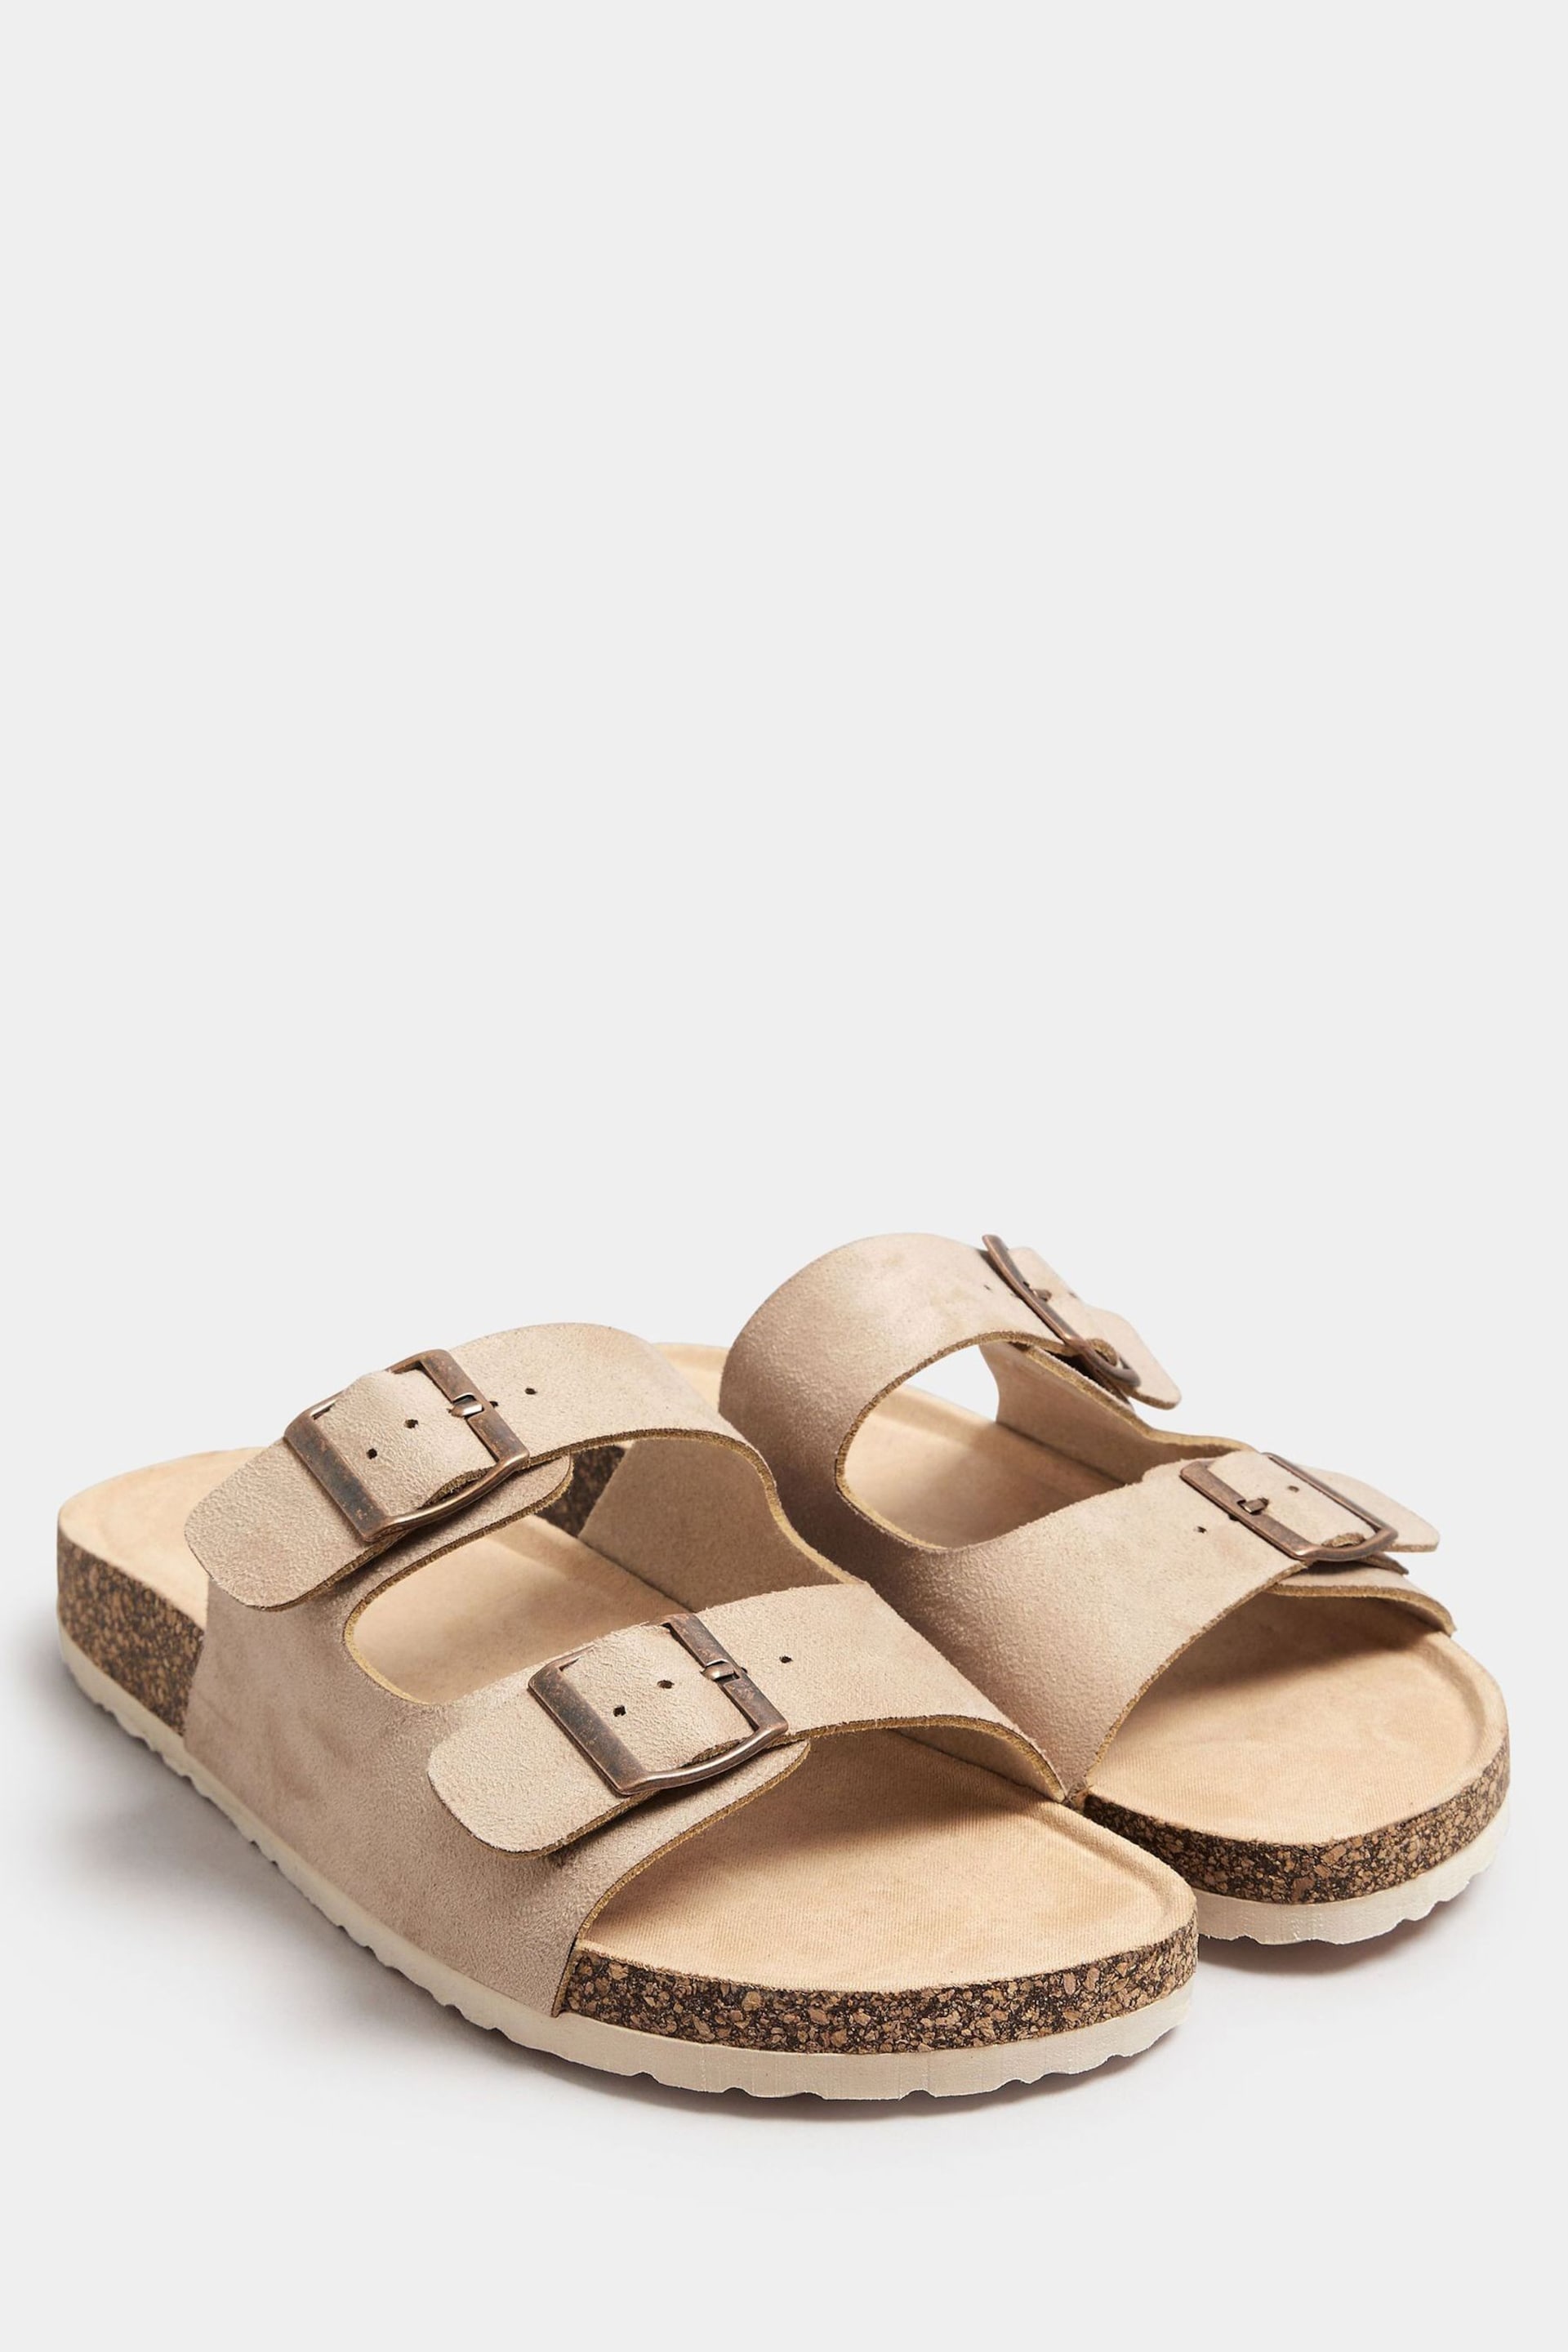 Yours Curve Natural Faux Suede Buckle Strap Footbed Sandals In Extra Wide EEE Fit - Image 3 of 7